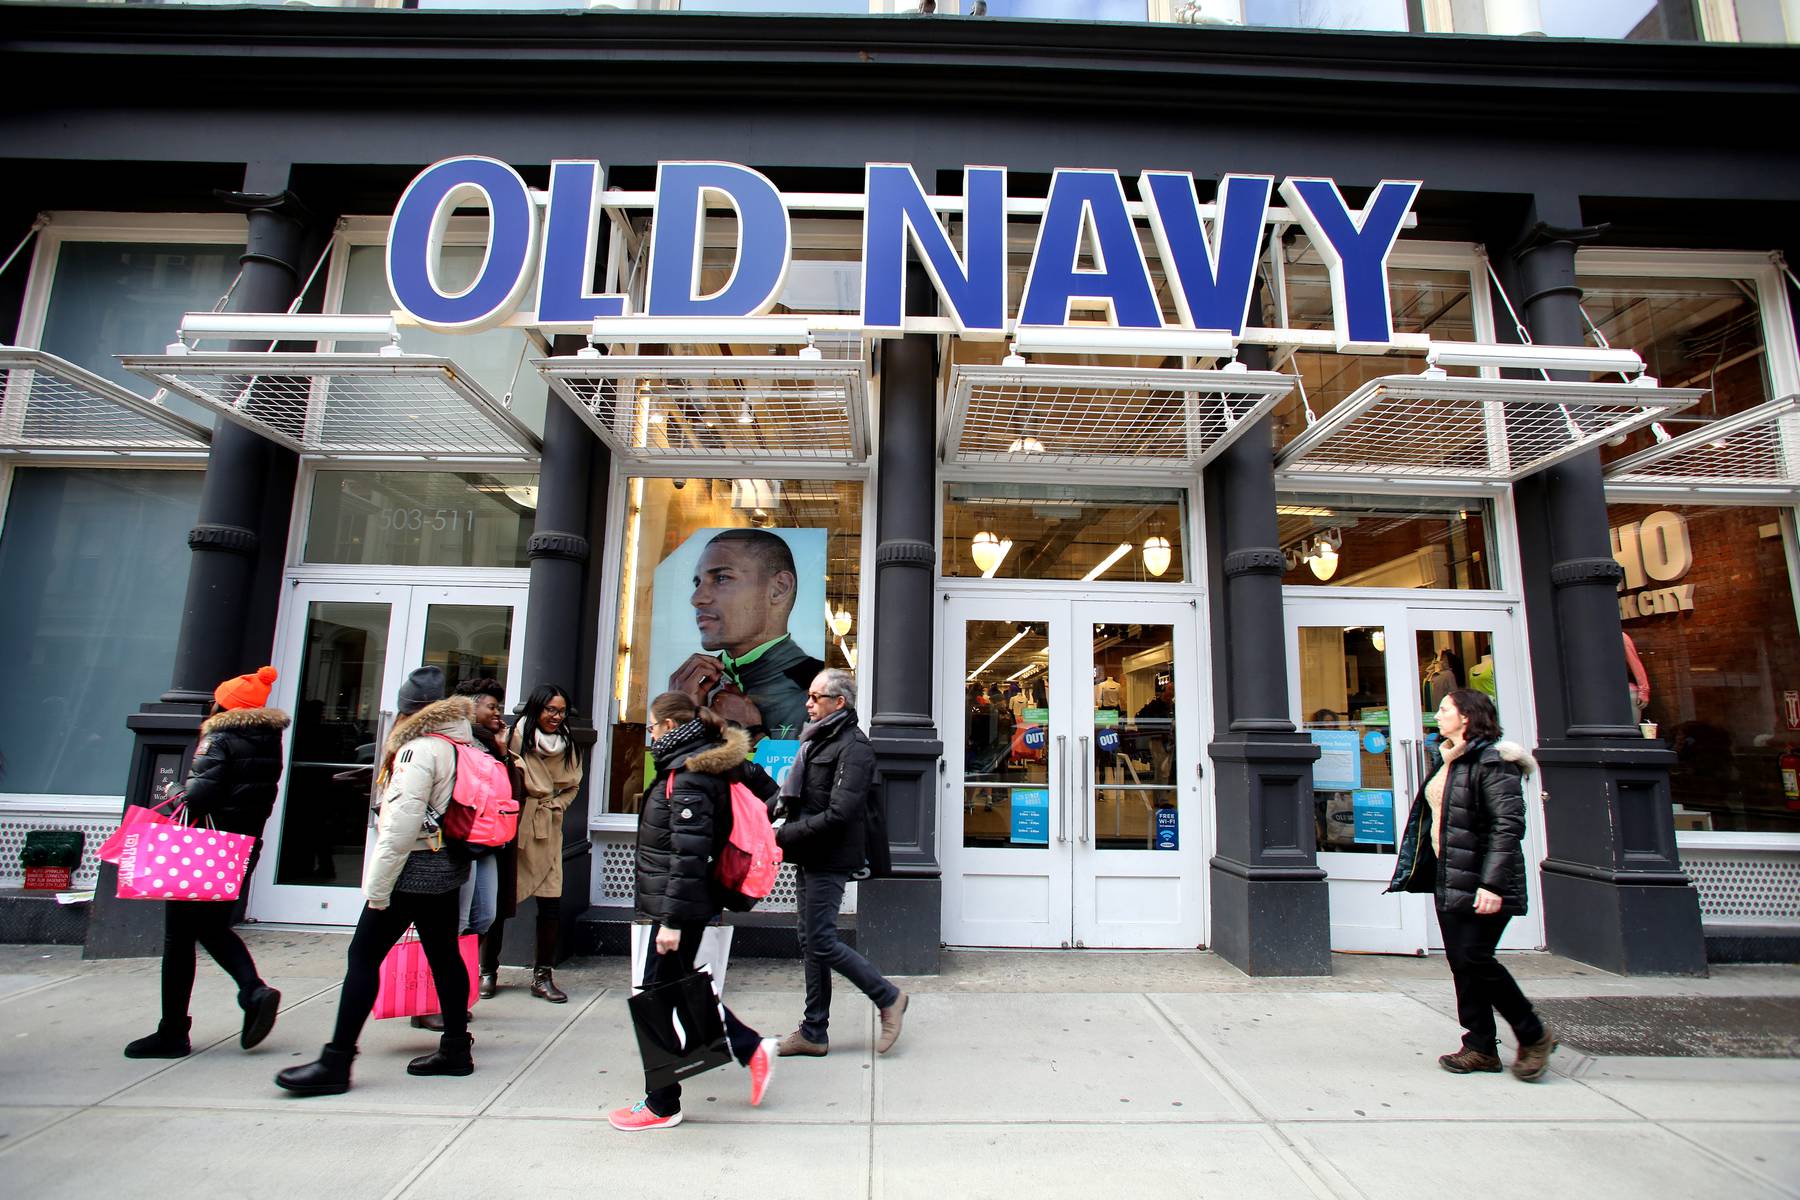 An Old Navy retail location.